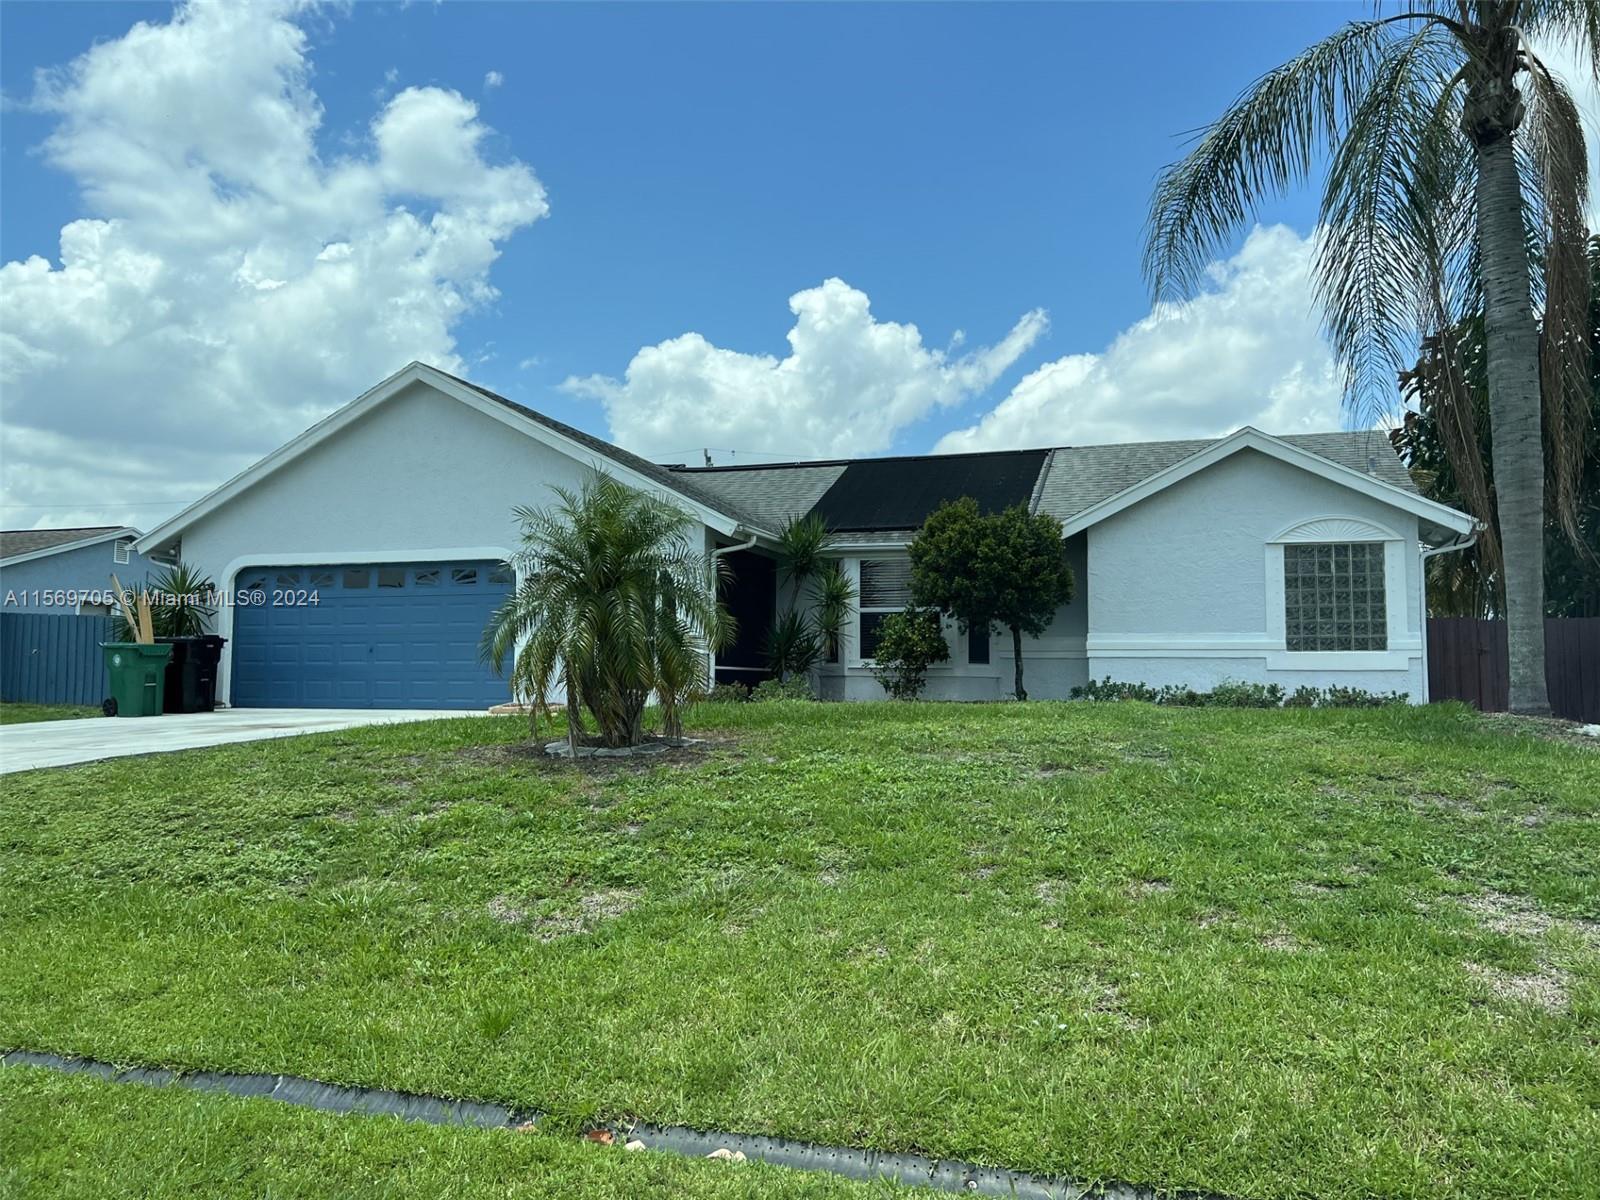 Photo of 863 SW Mccomb Ave in Port St Lucie, FL